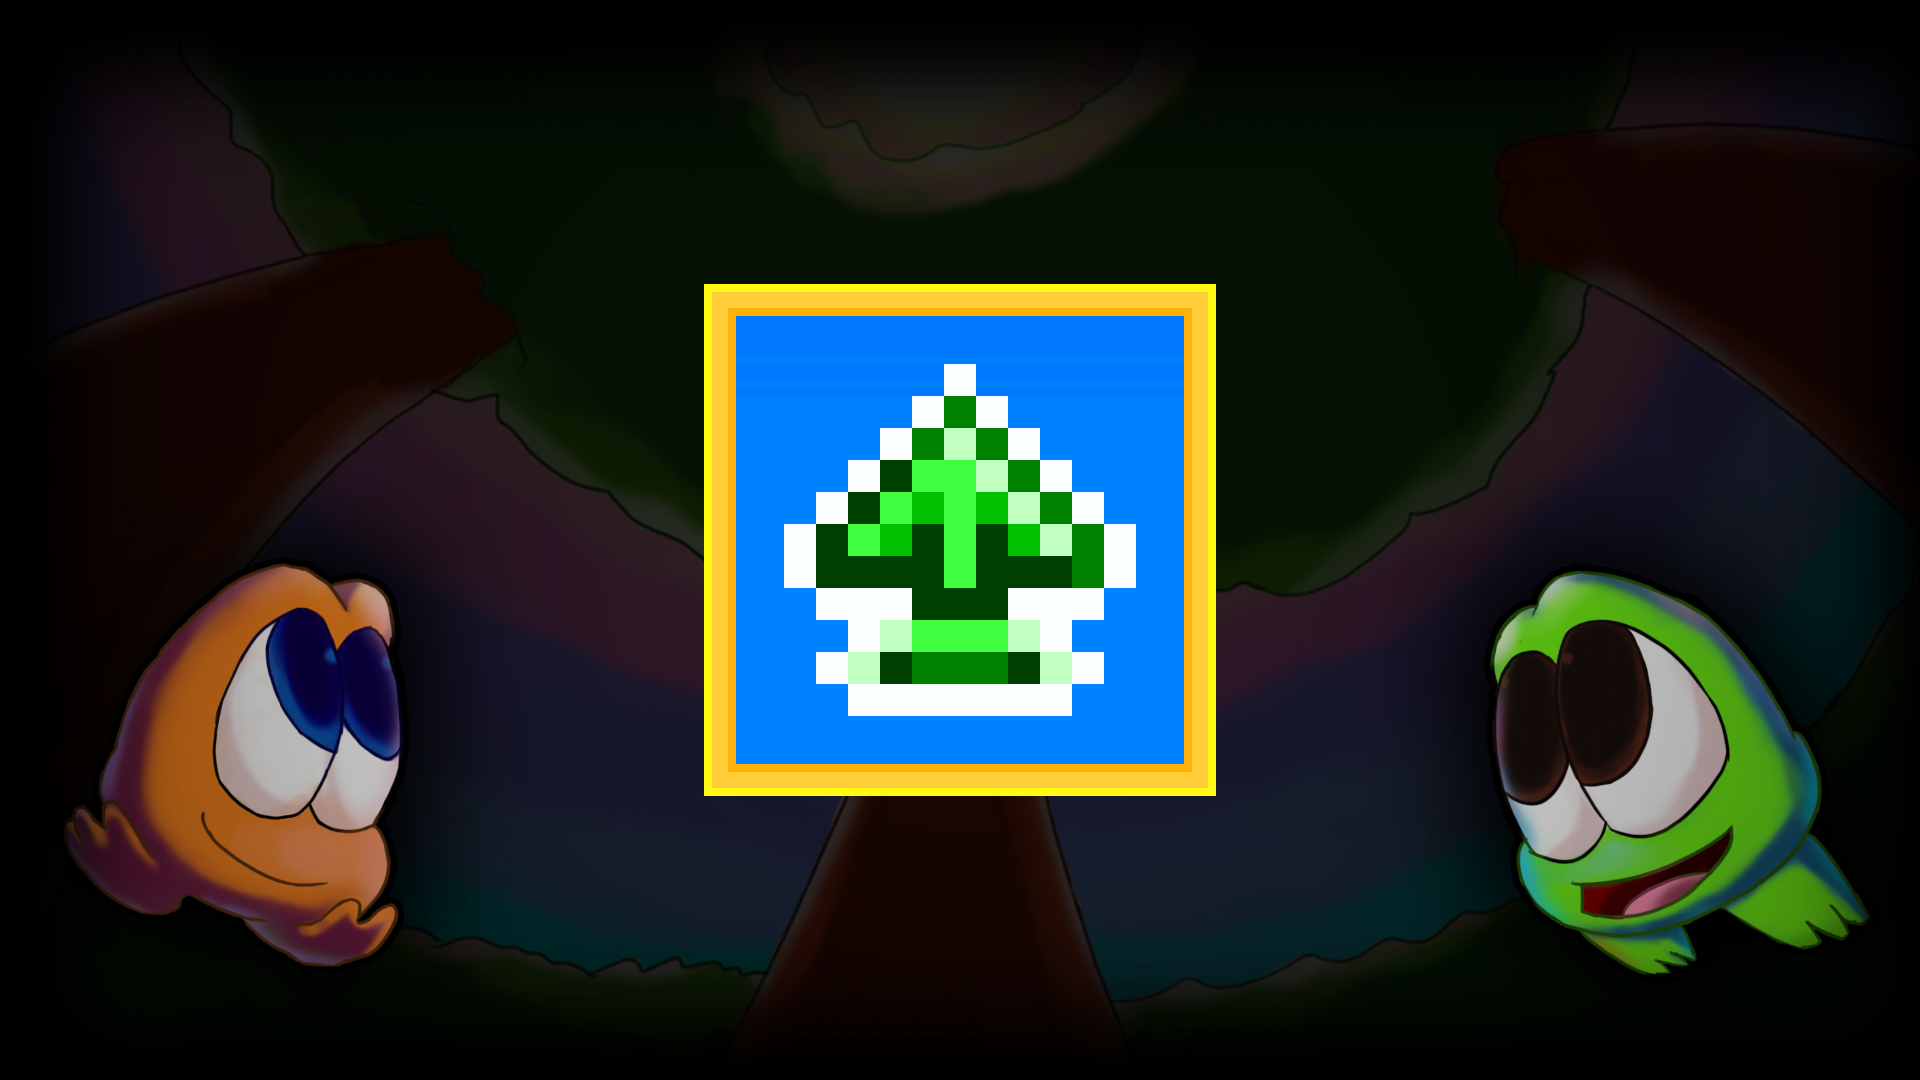 Icon for Green Missile